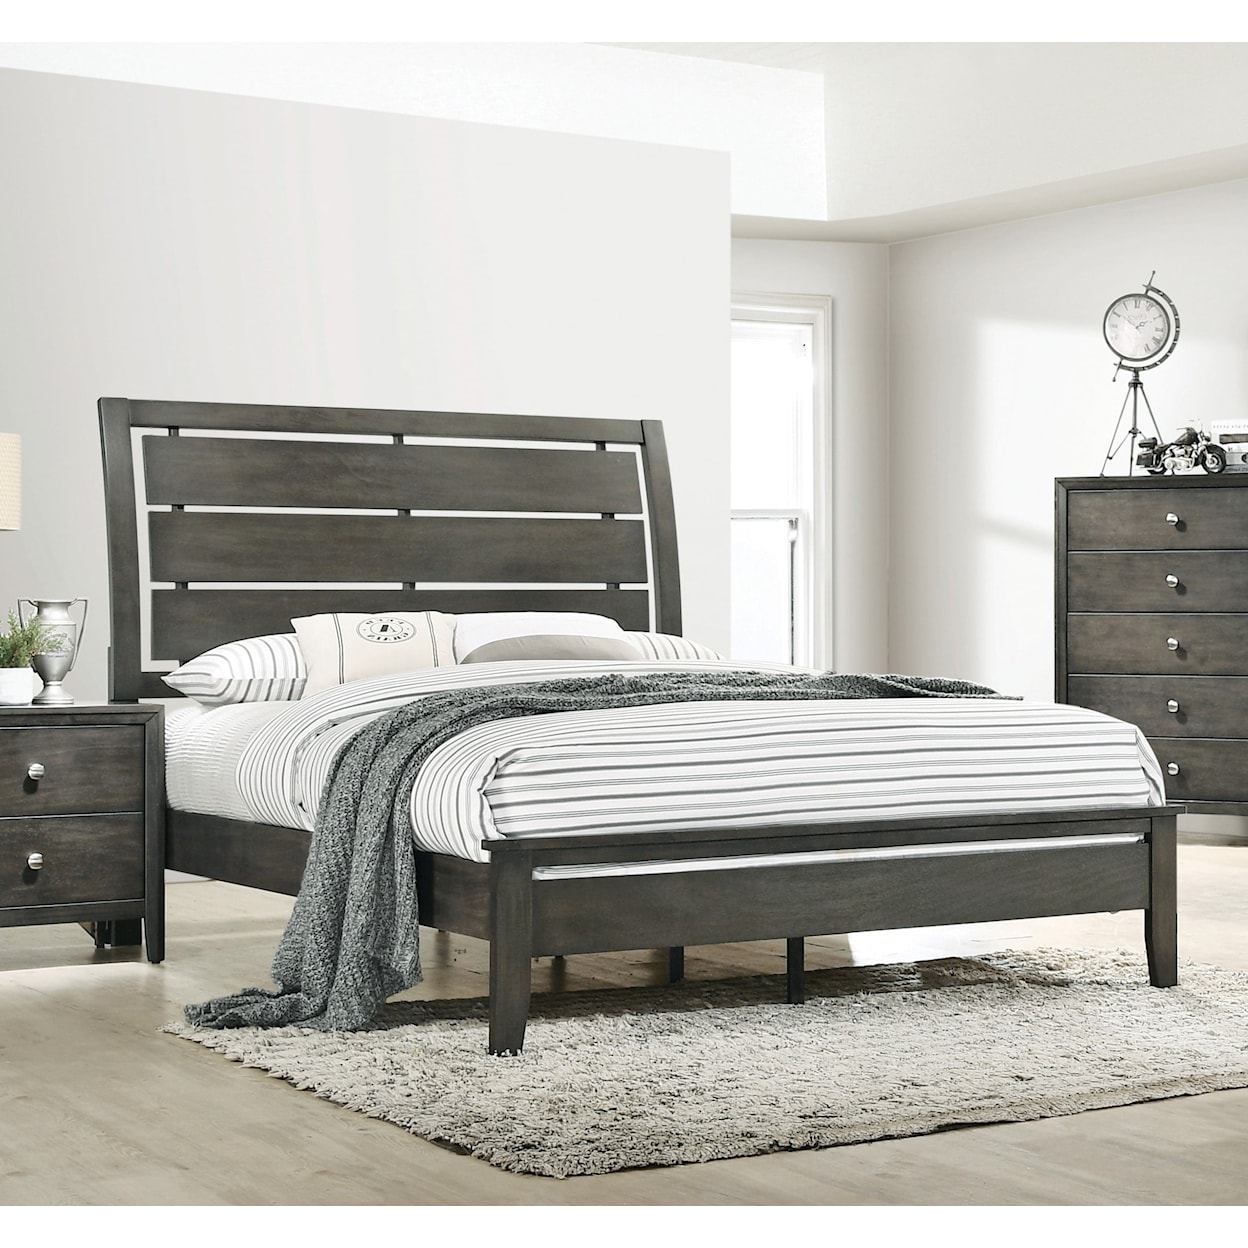 Lifestyle C1060A Queen Bed